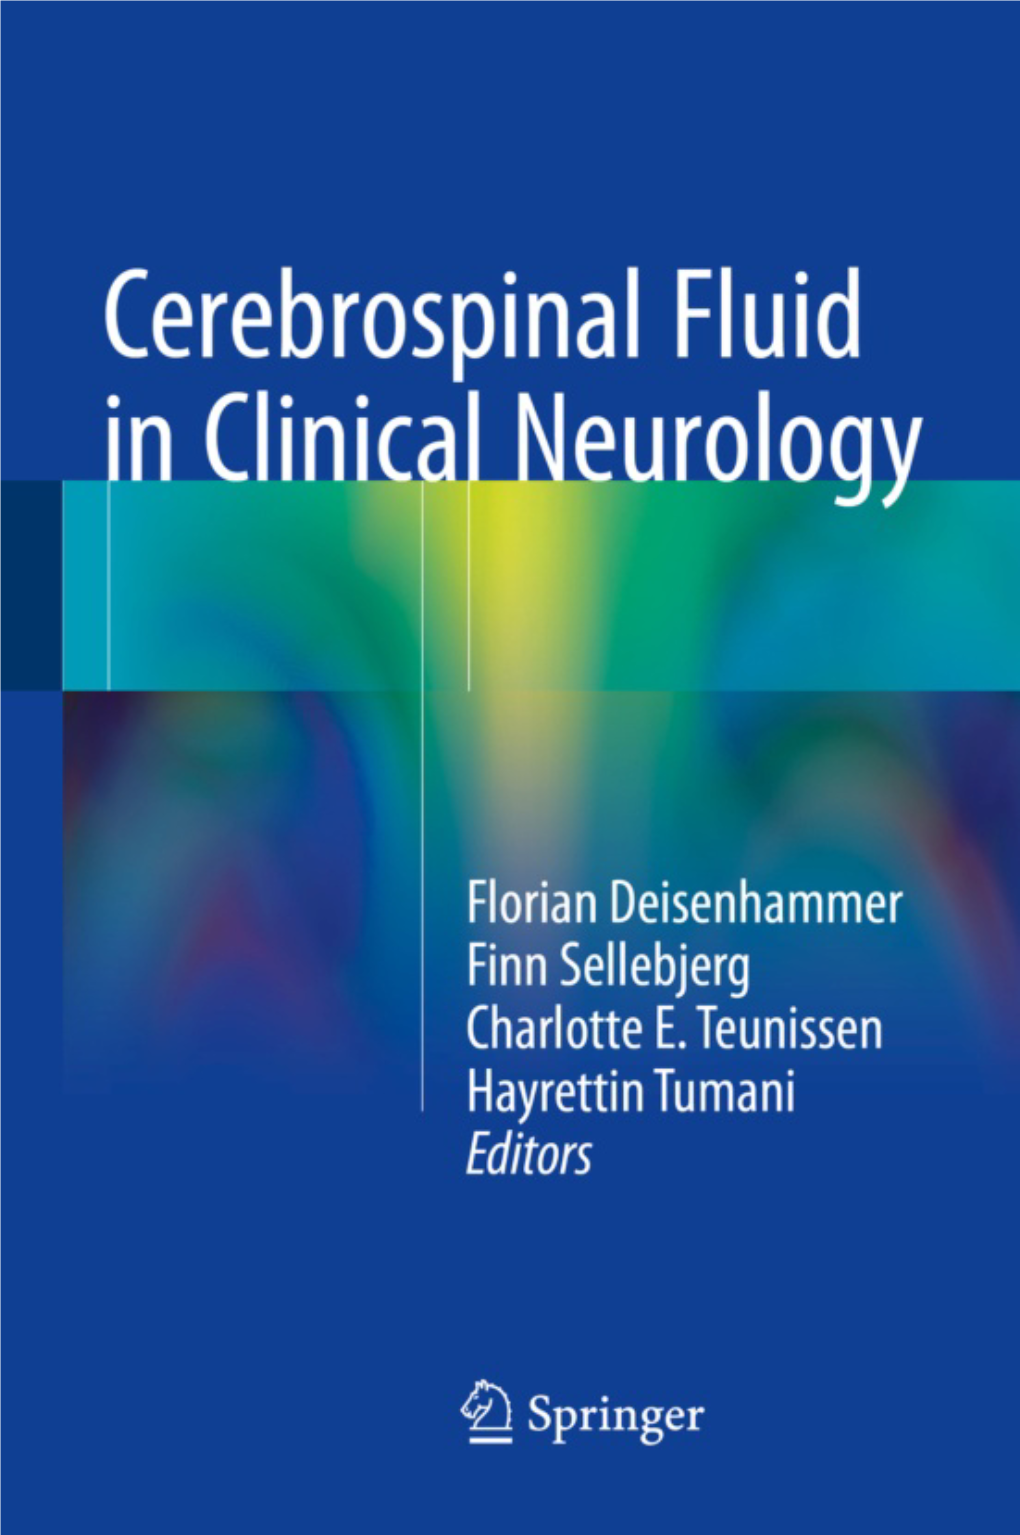 1 the History of Cerebrospinal Fluid